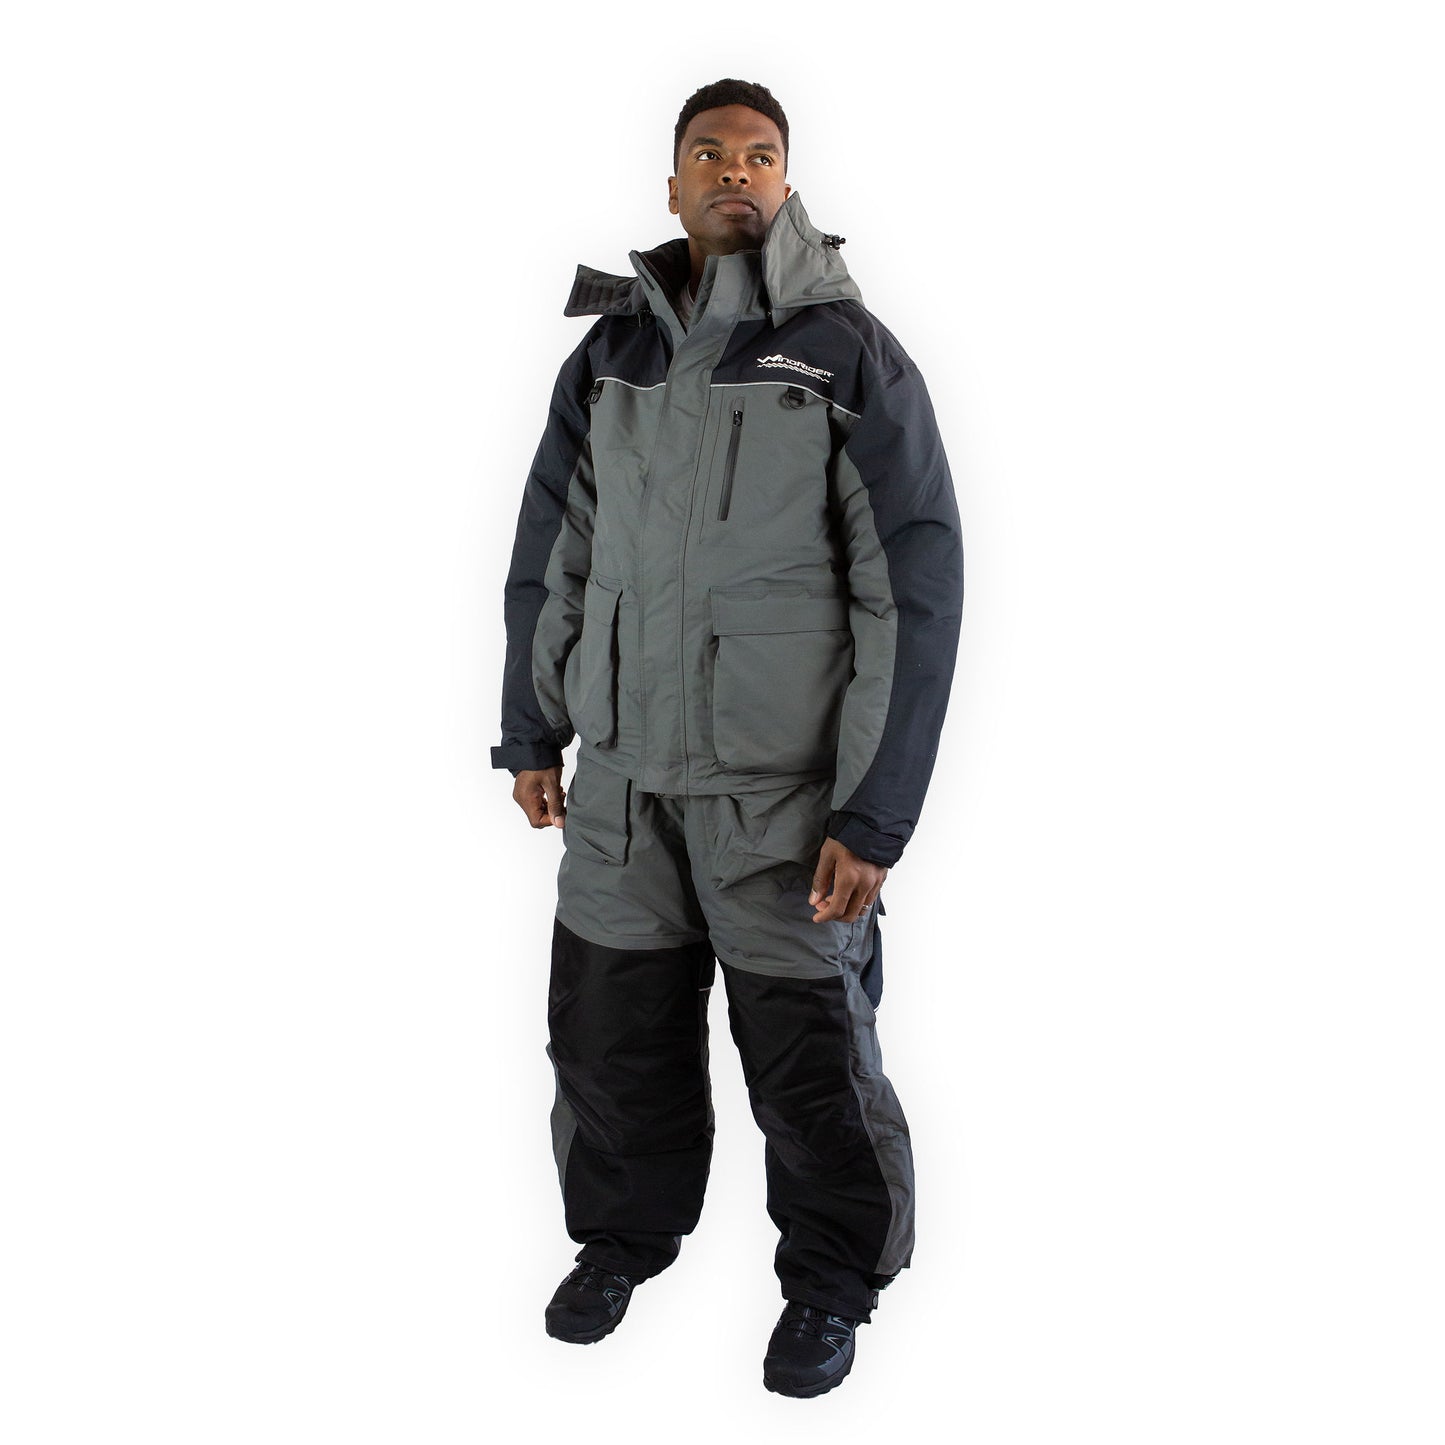 BOREAS Floating Ice Fishing Suit By WindRider Michigan, 60% OFF